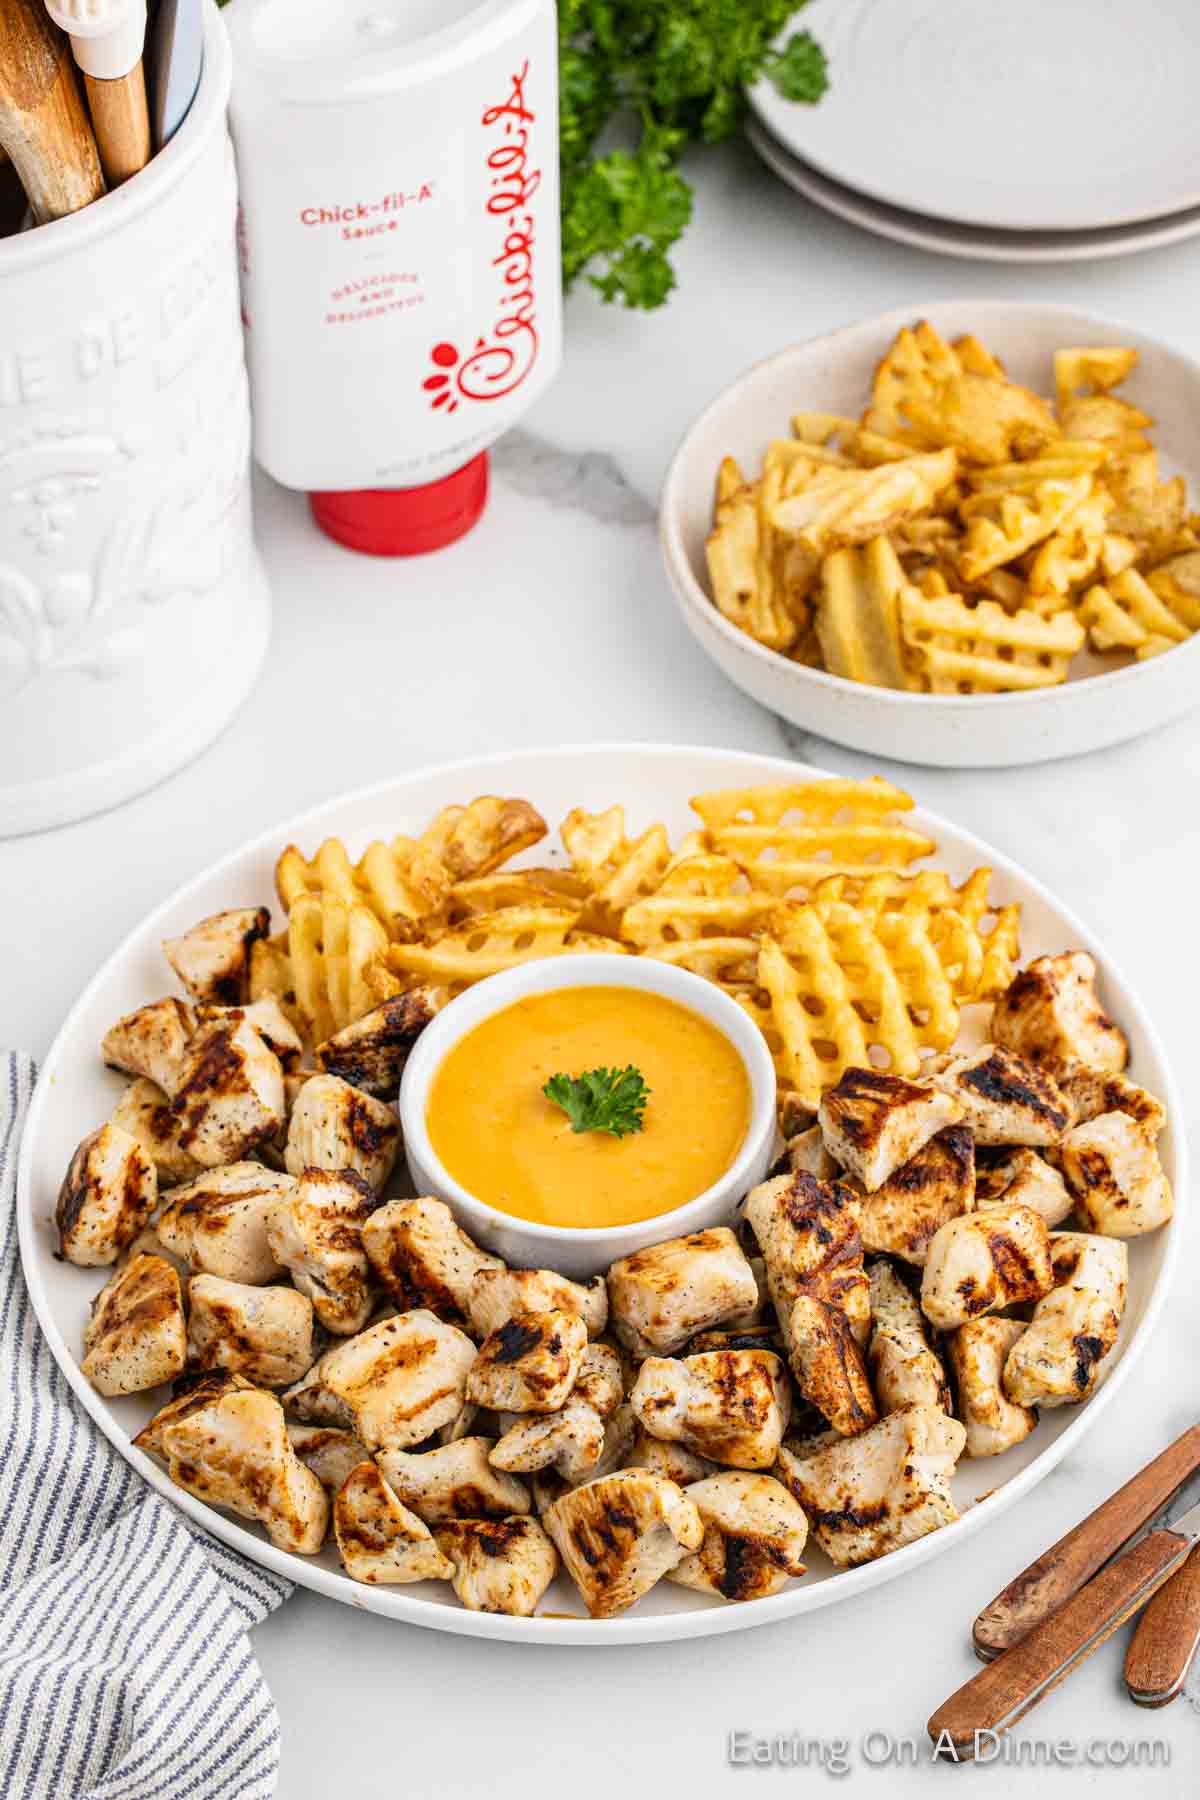 Grilled chicken nuggets on a platter with a side of fries and dipping sauce